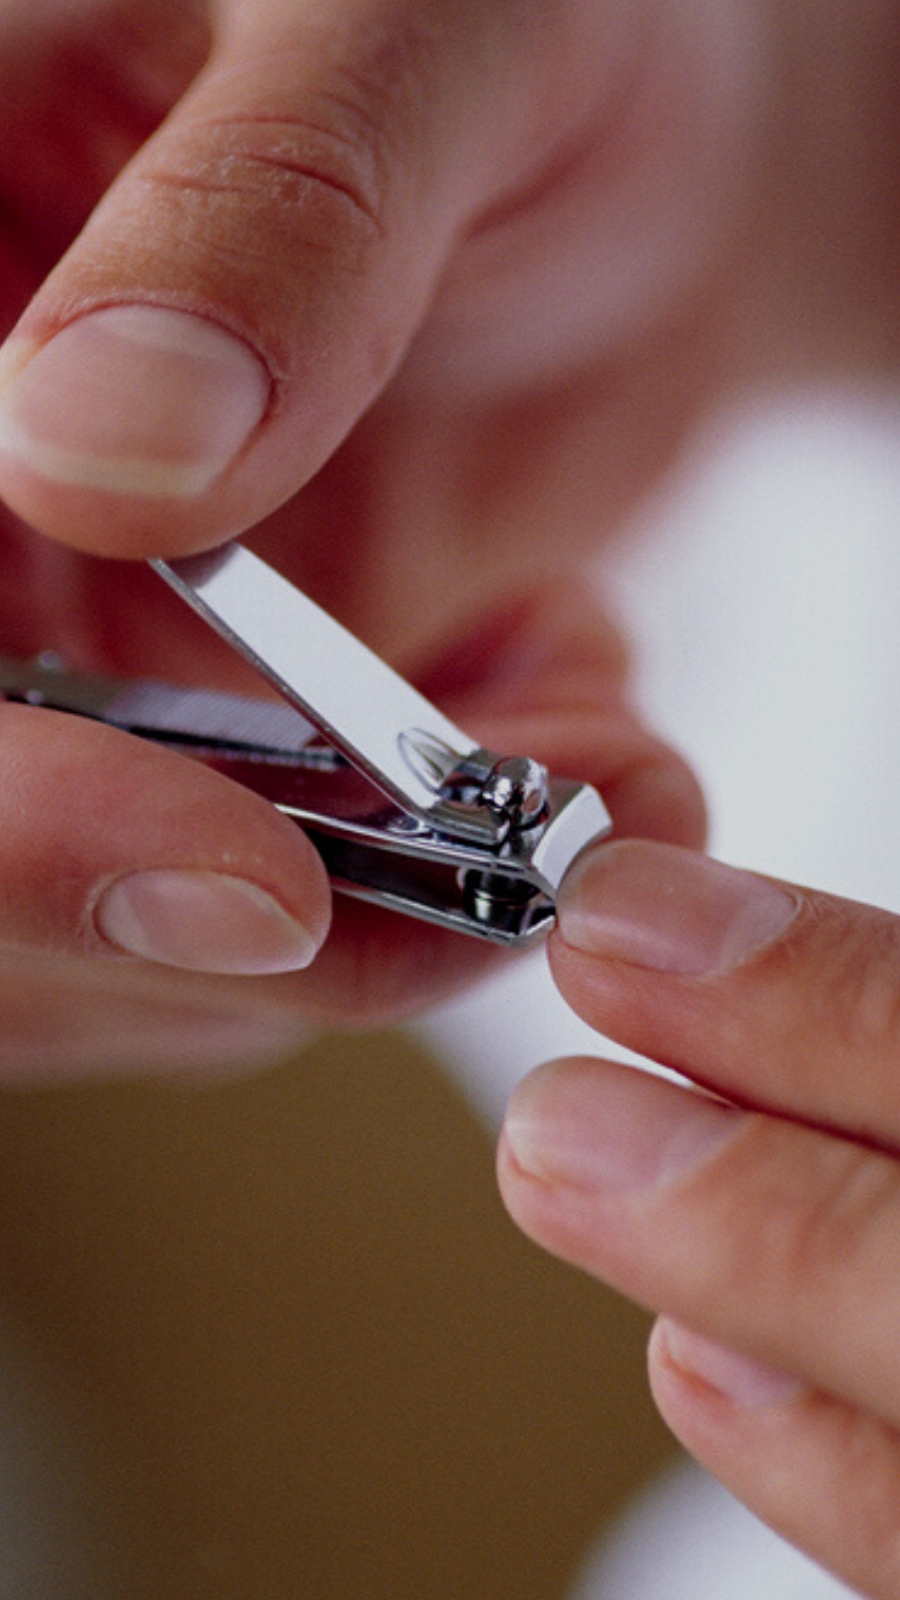 How To Cut Your Nails (The Sunnah Way) – WFIA | Lea Bridge Road Mosque |